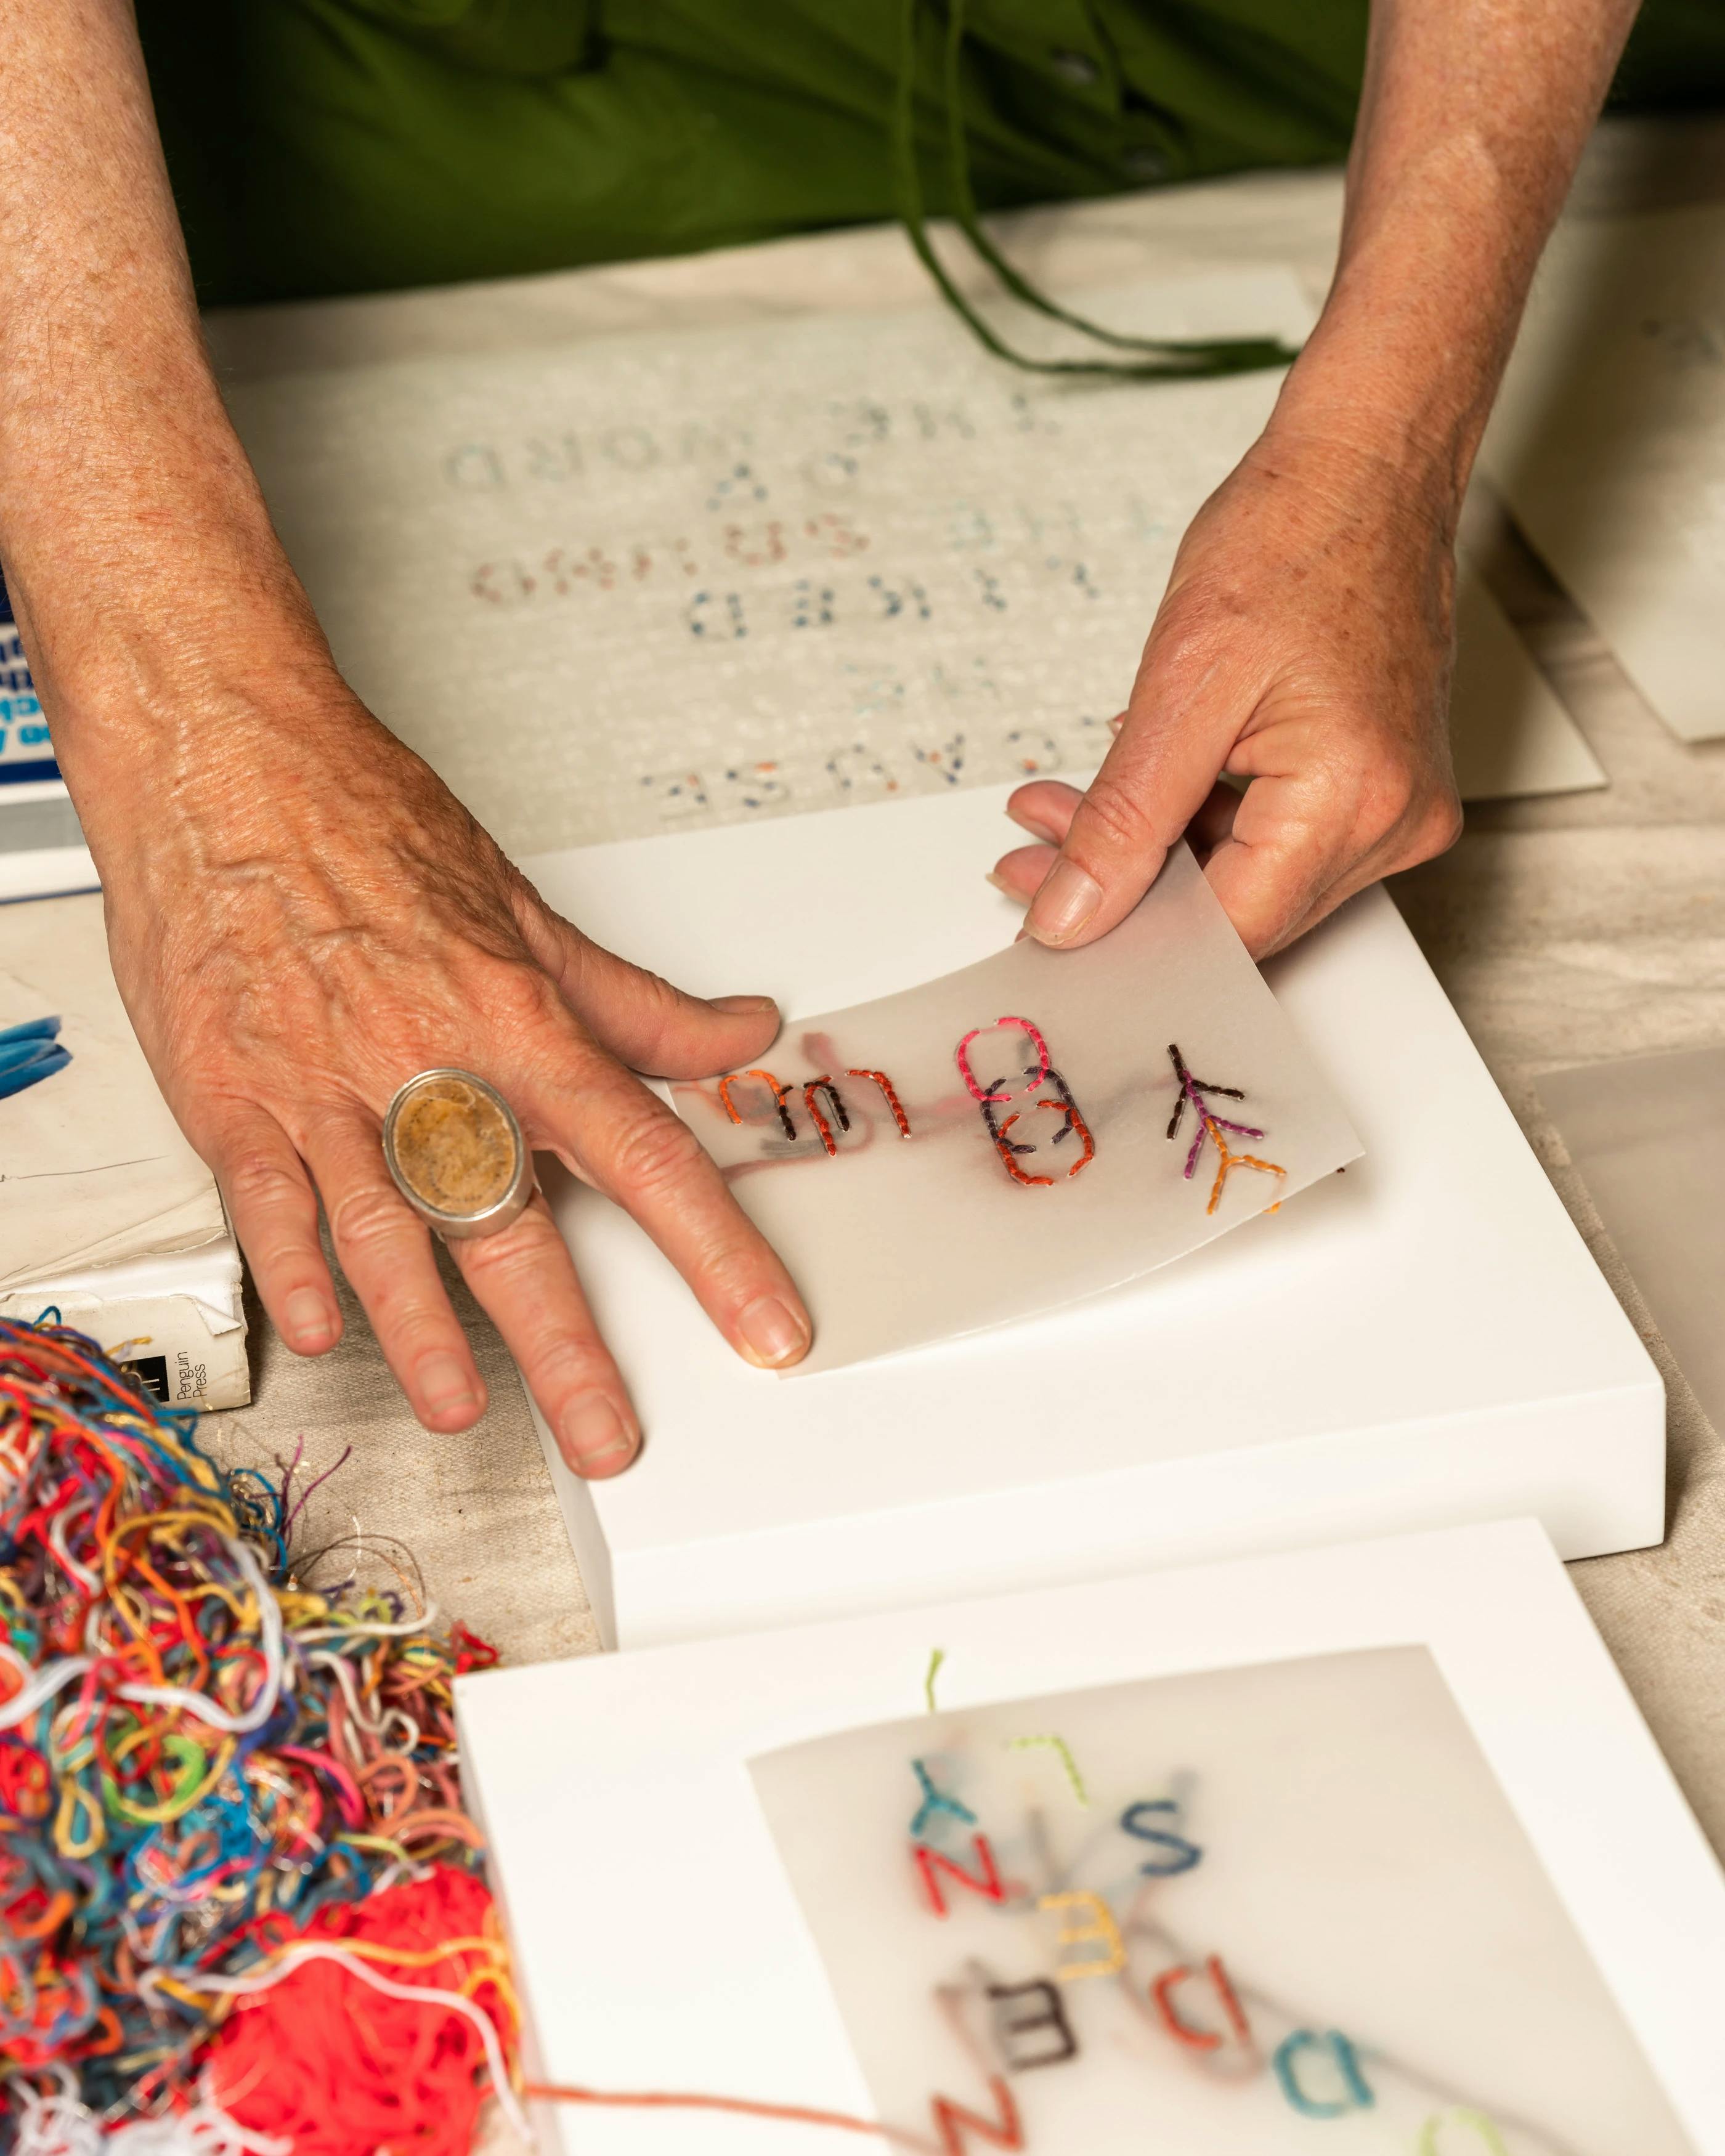 Artist Gail Tarantino placing threaded words on film onto canvas during her residency at MacArthur Place in Sonoma, CA. 